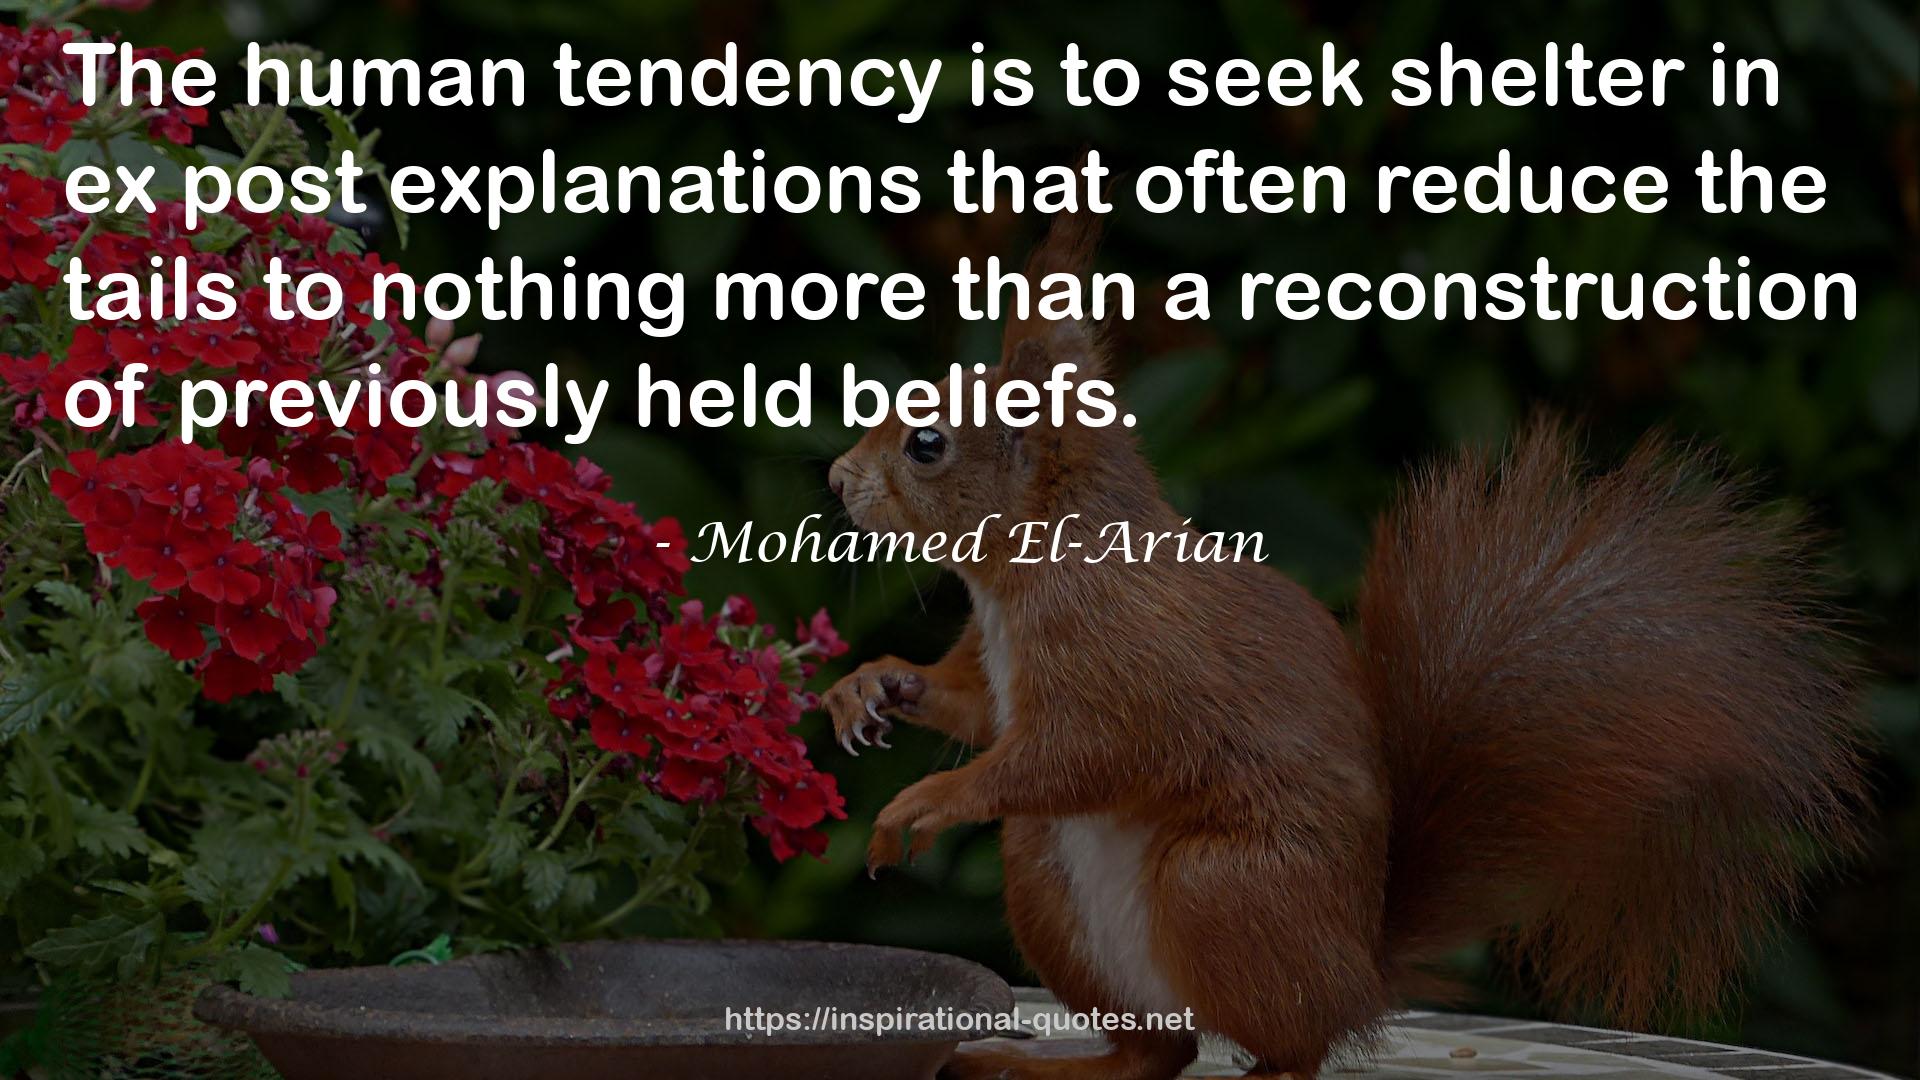 Mohamed El-Arian QUOTES